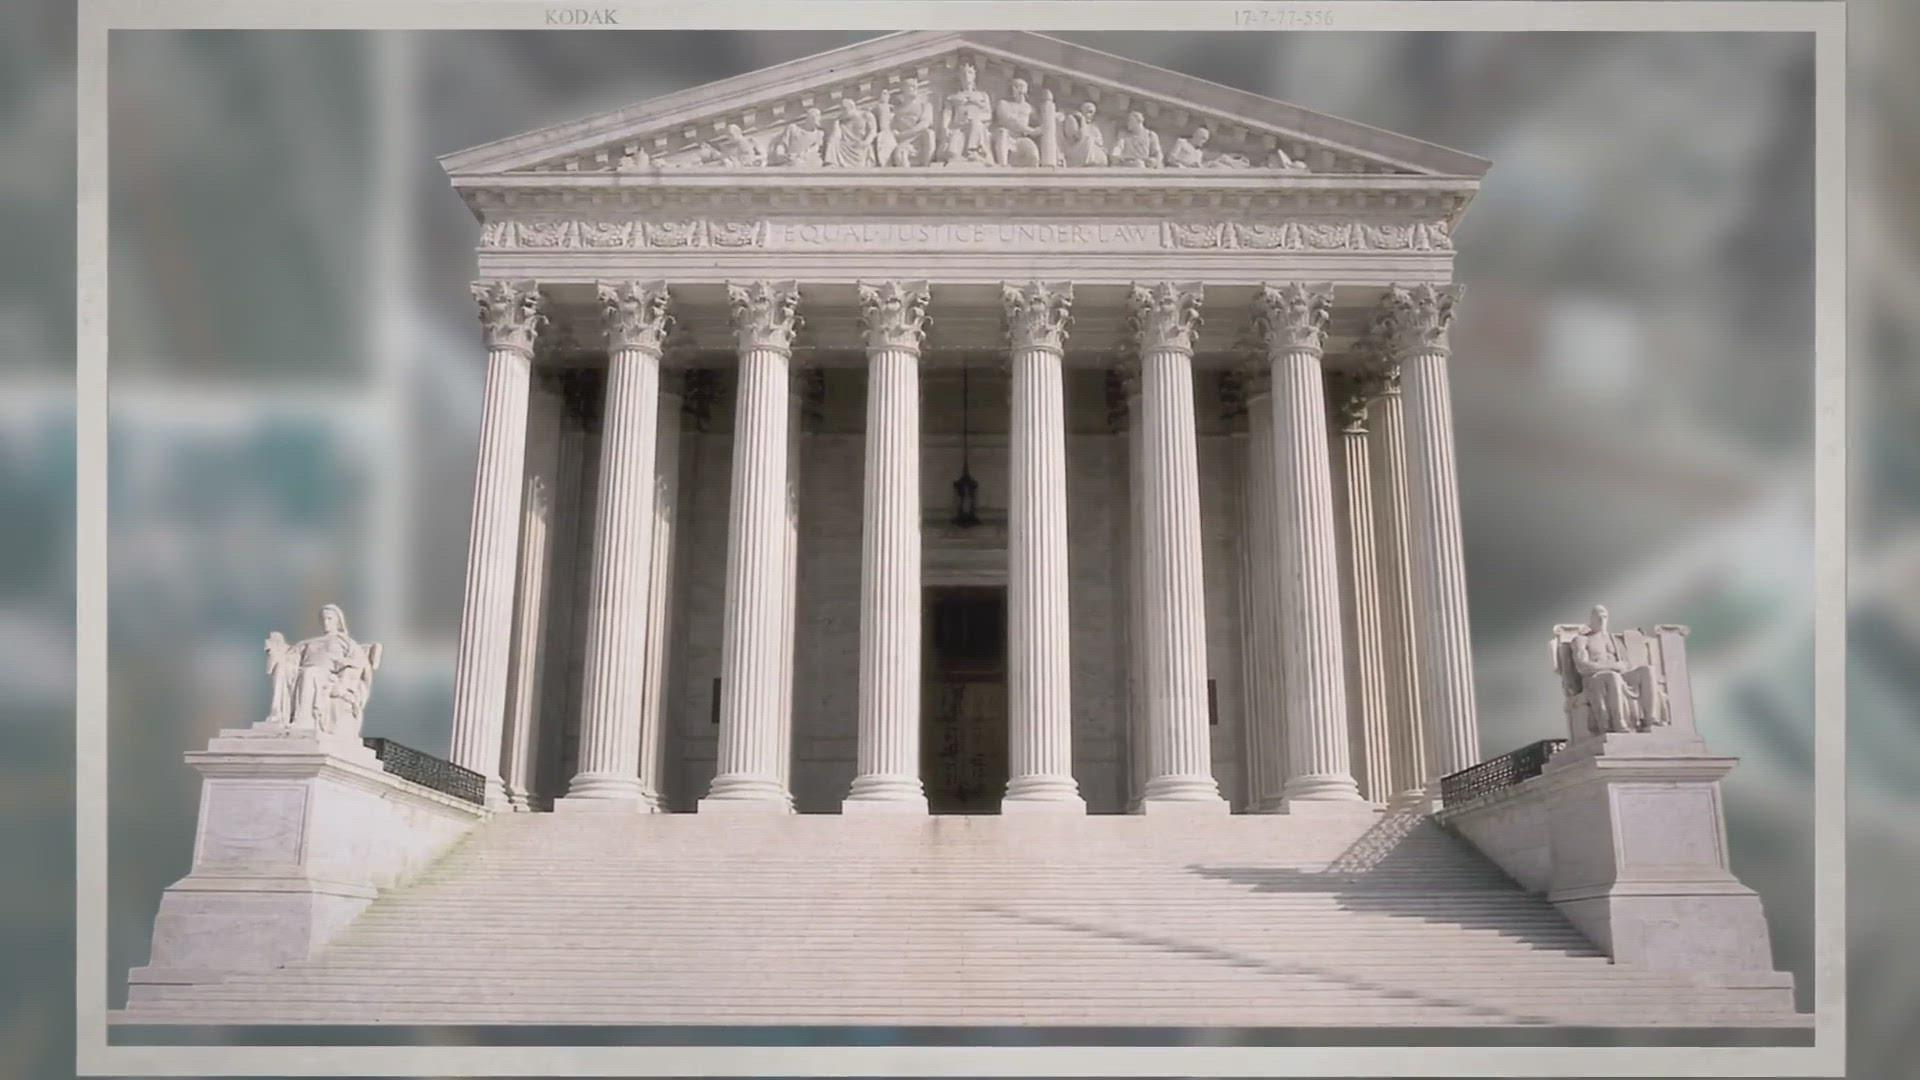 'Video thumbnail for Supreme Court ‘100 Miles’ Border Ruling'